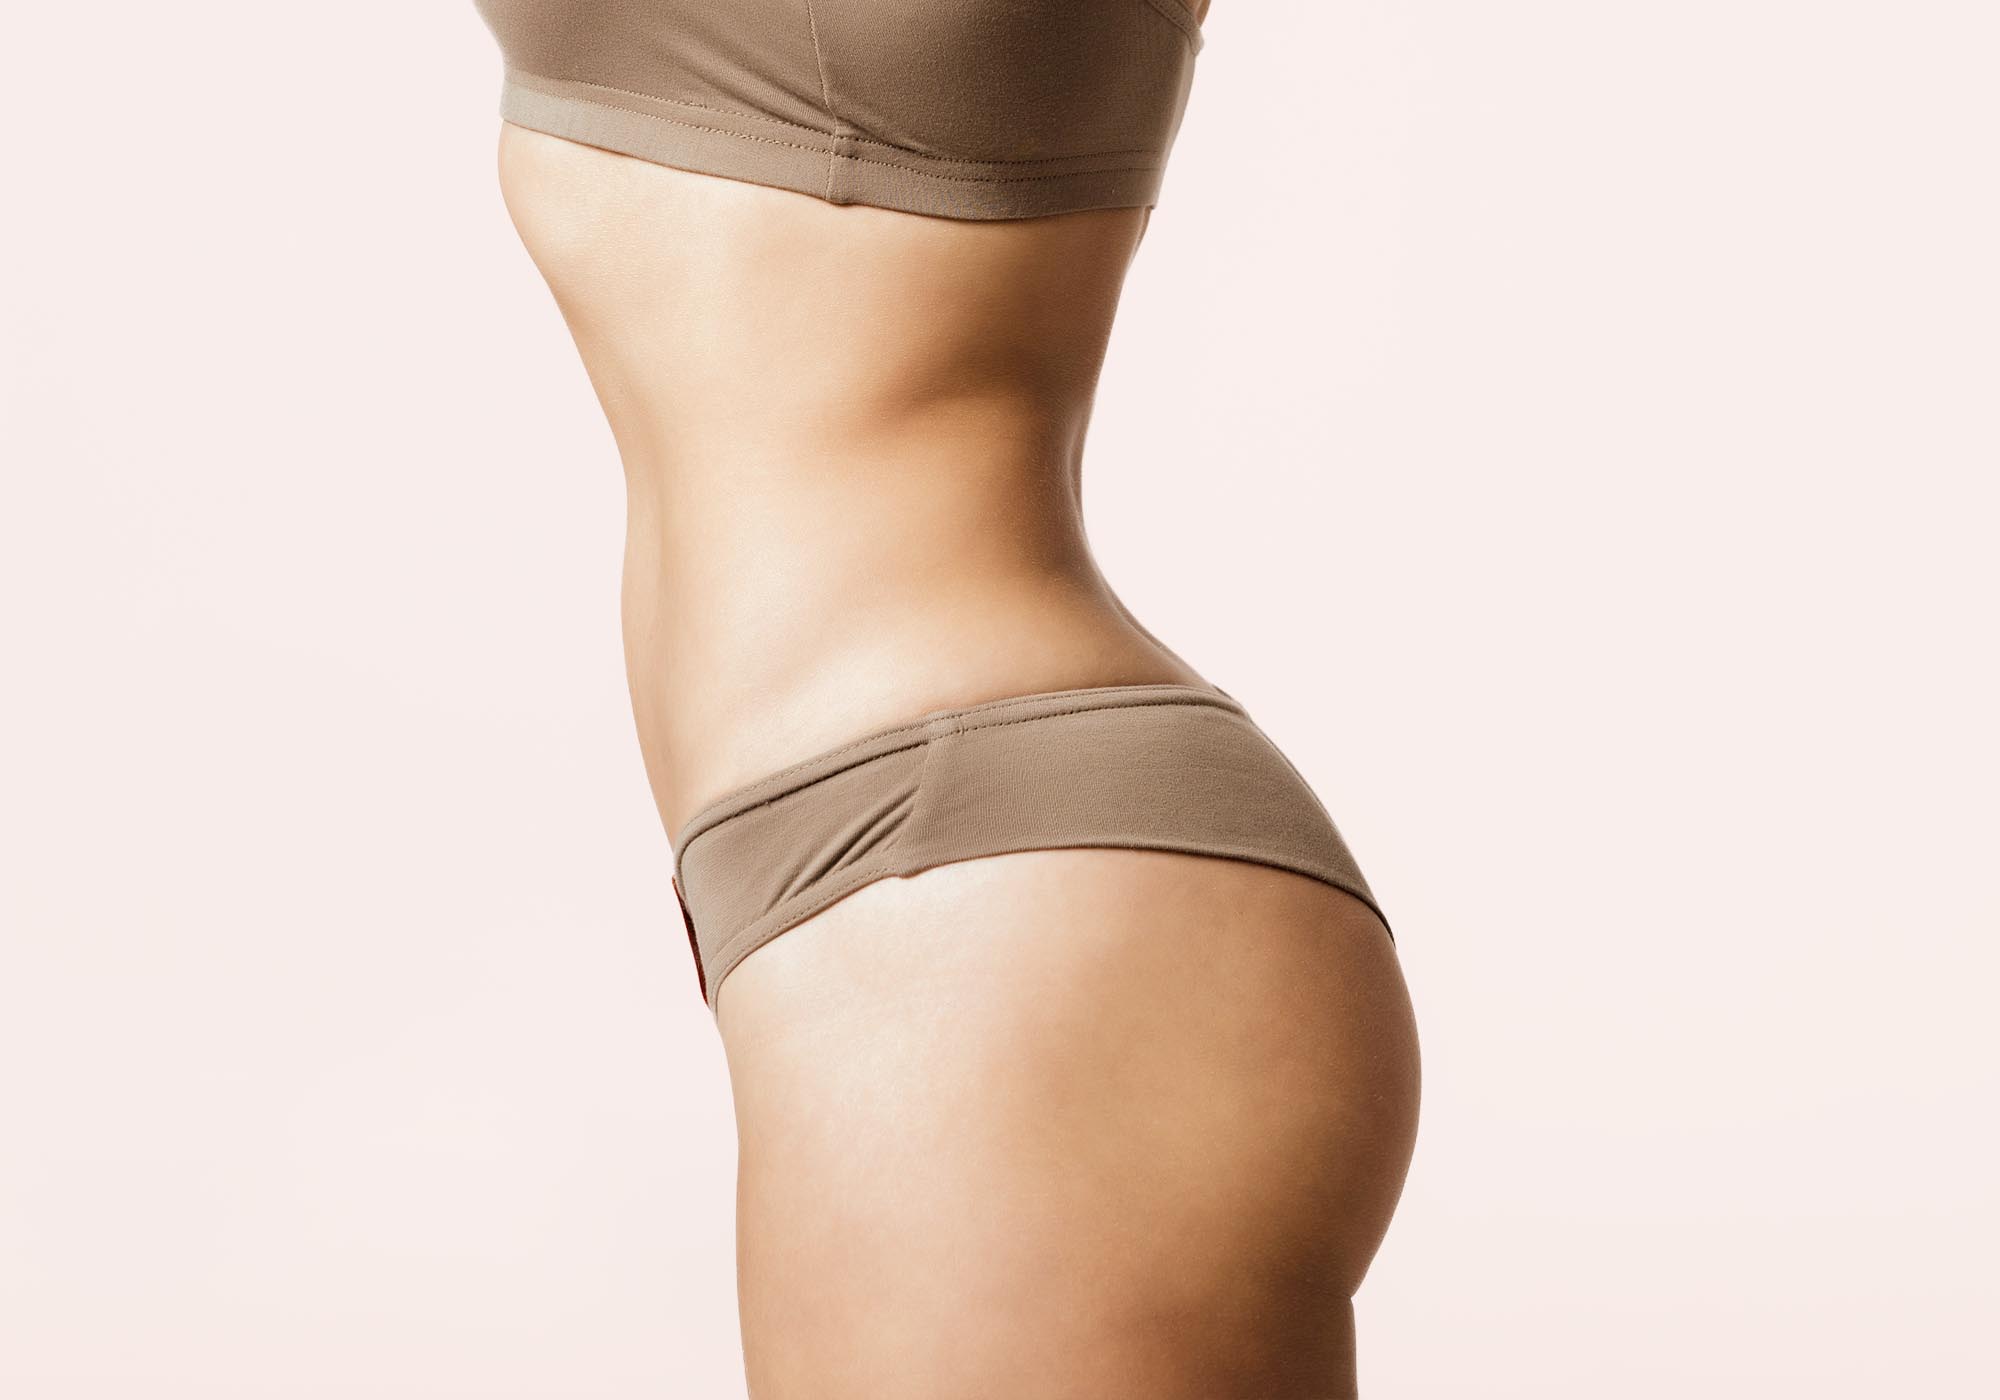 The Skinny BBL Makes Butt Augmentation an Option for More Patients RealSelf News